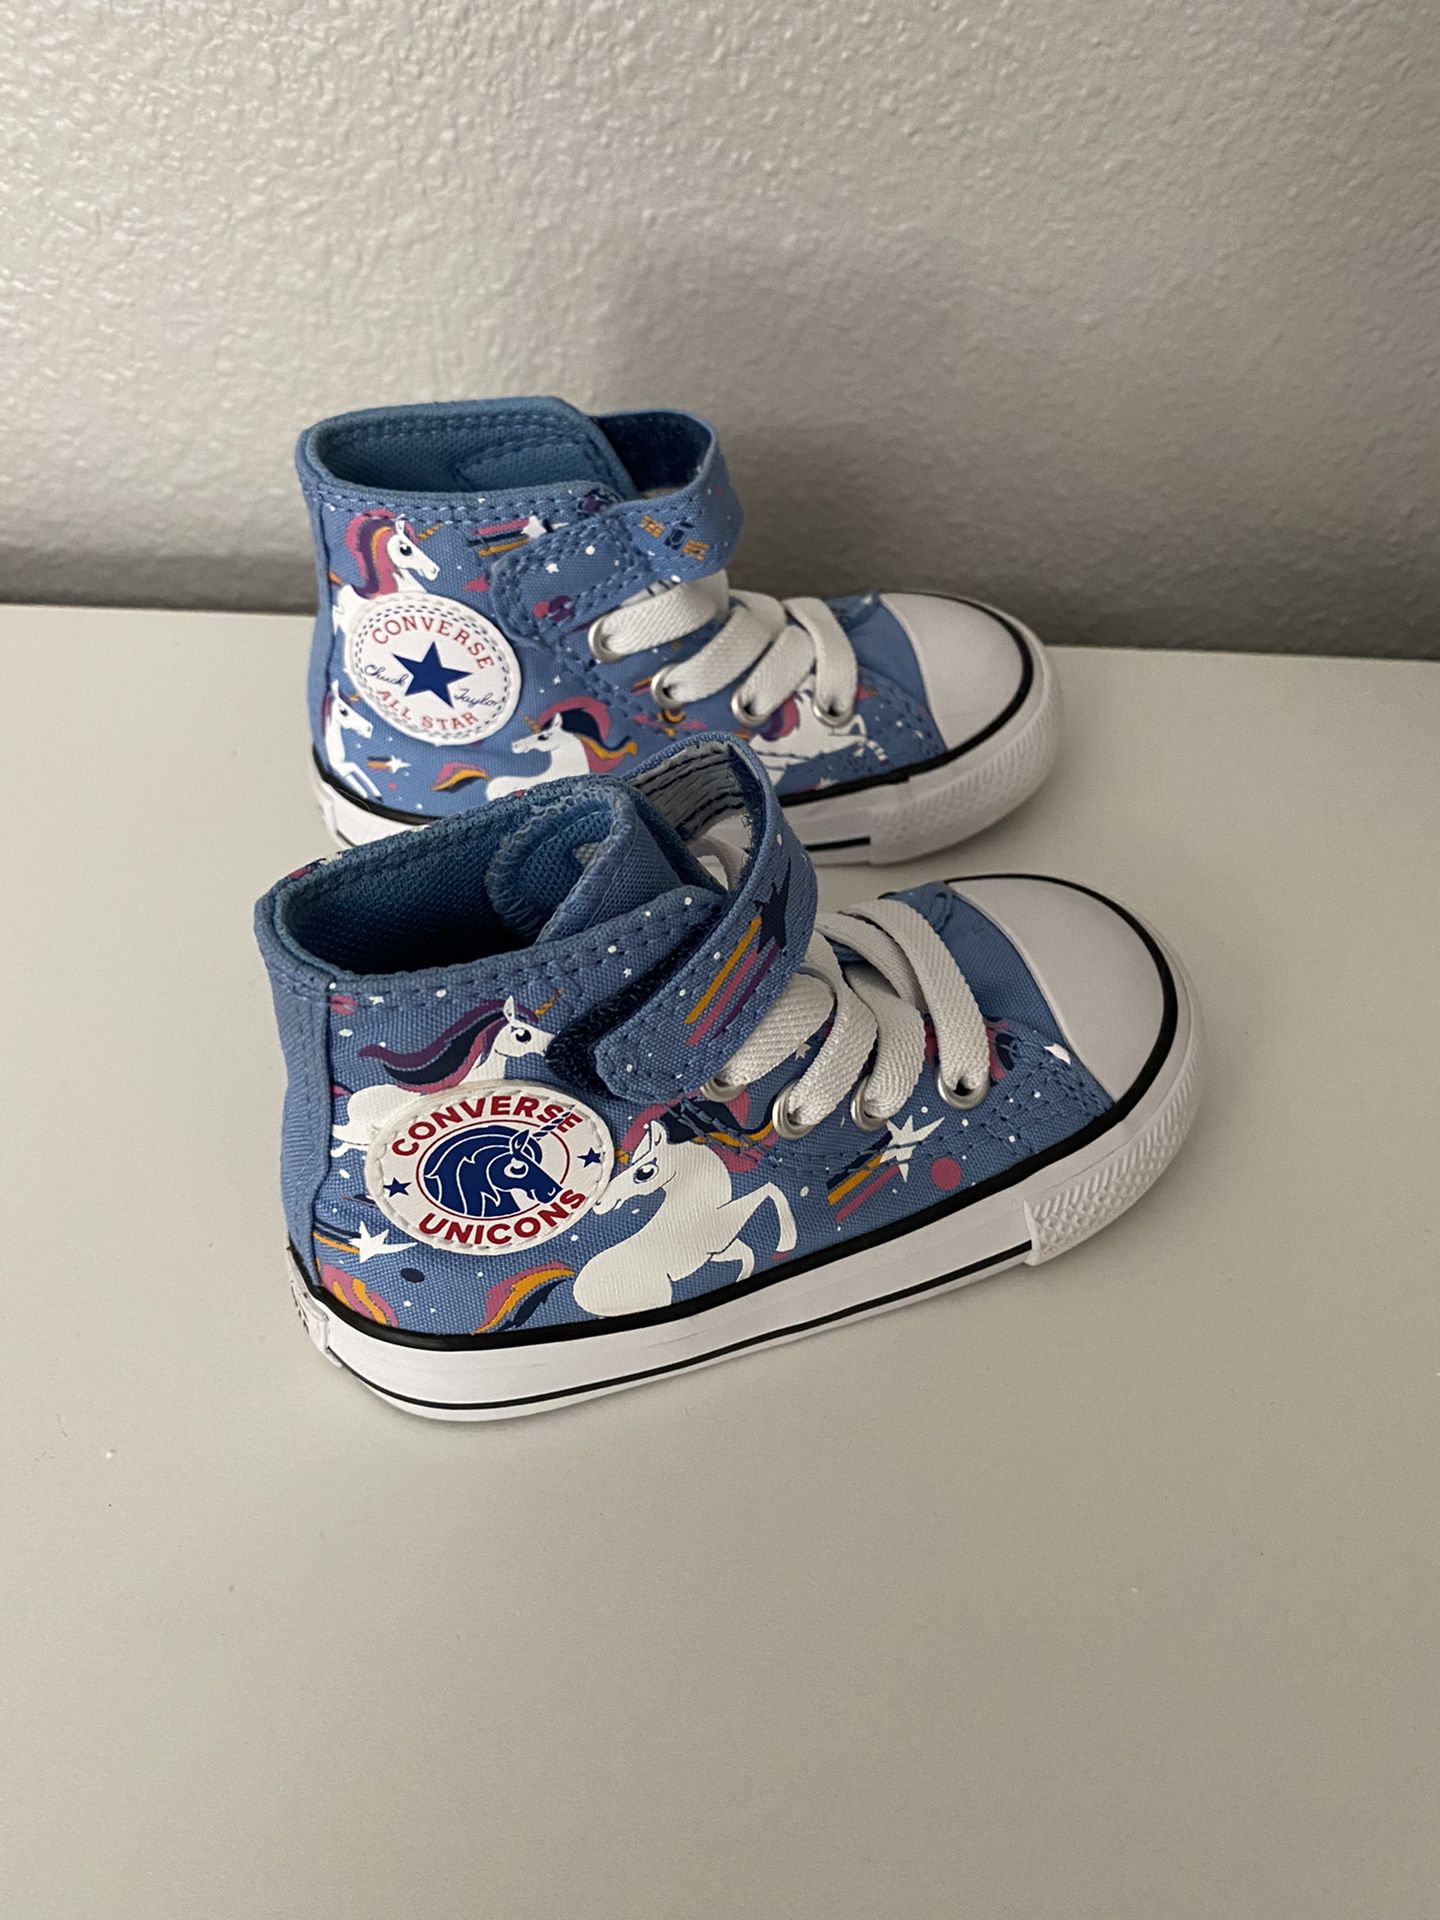 Toddler Size 5 Converse Únicons for in Oregon City, OR - OfferUp